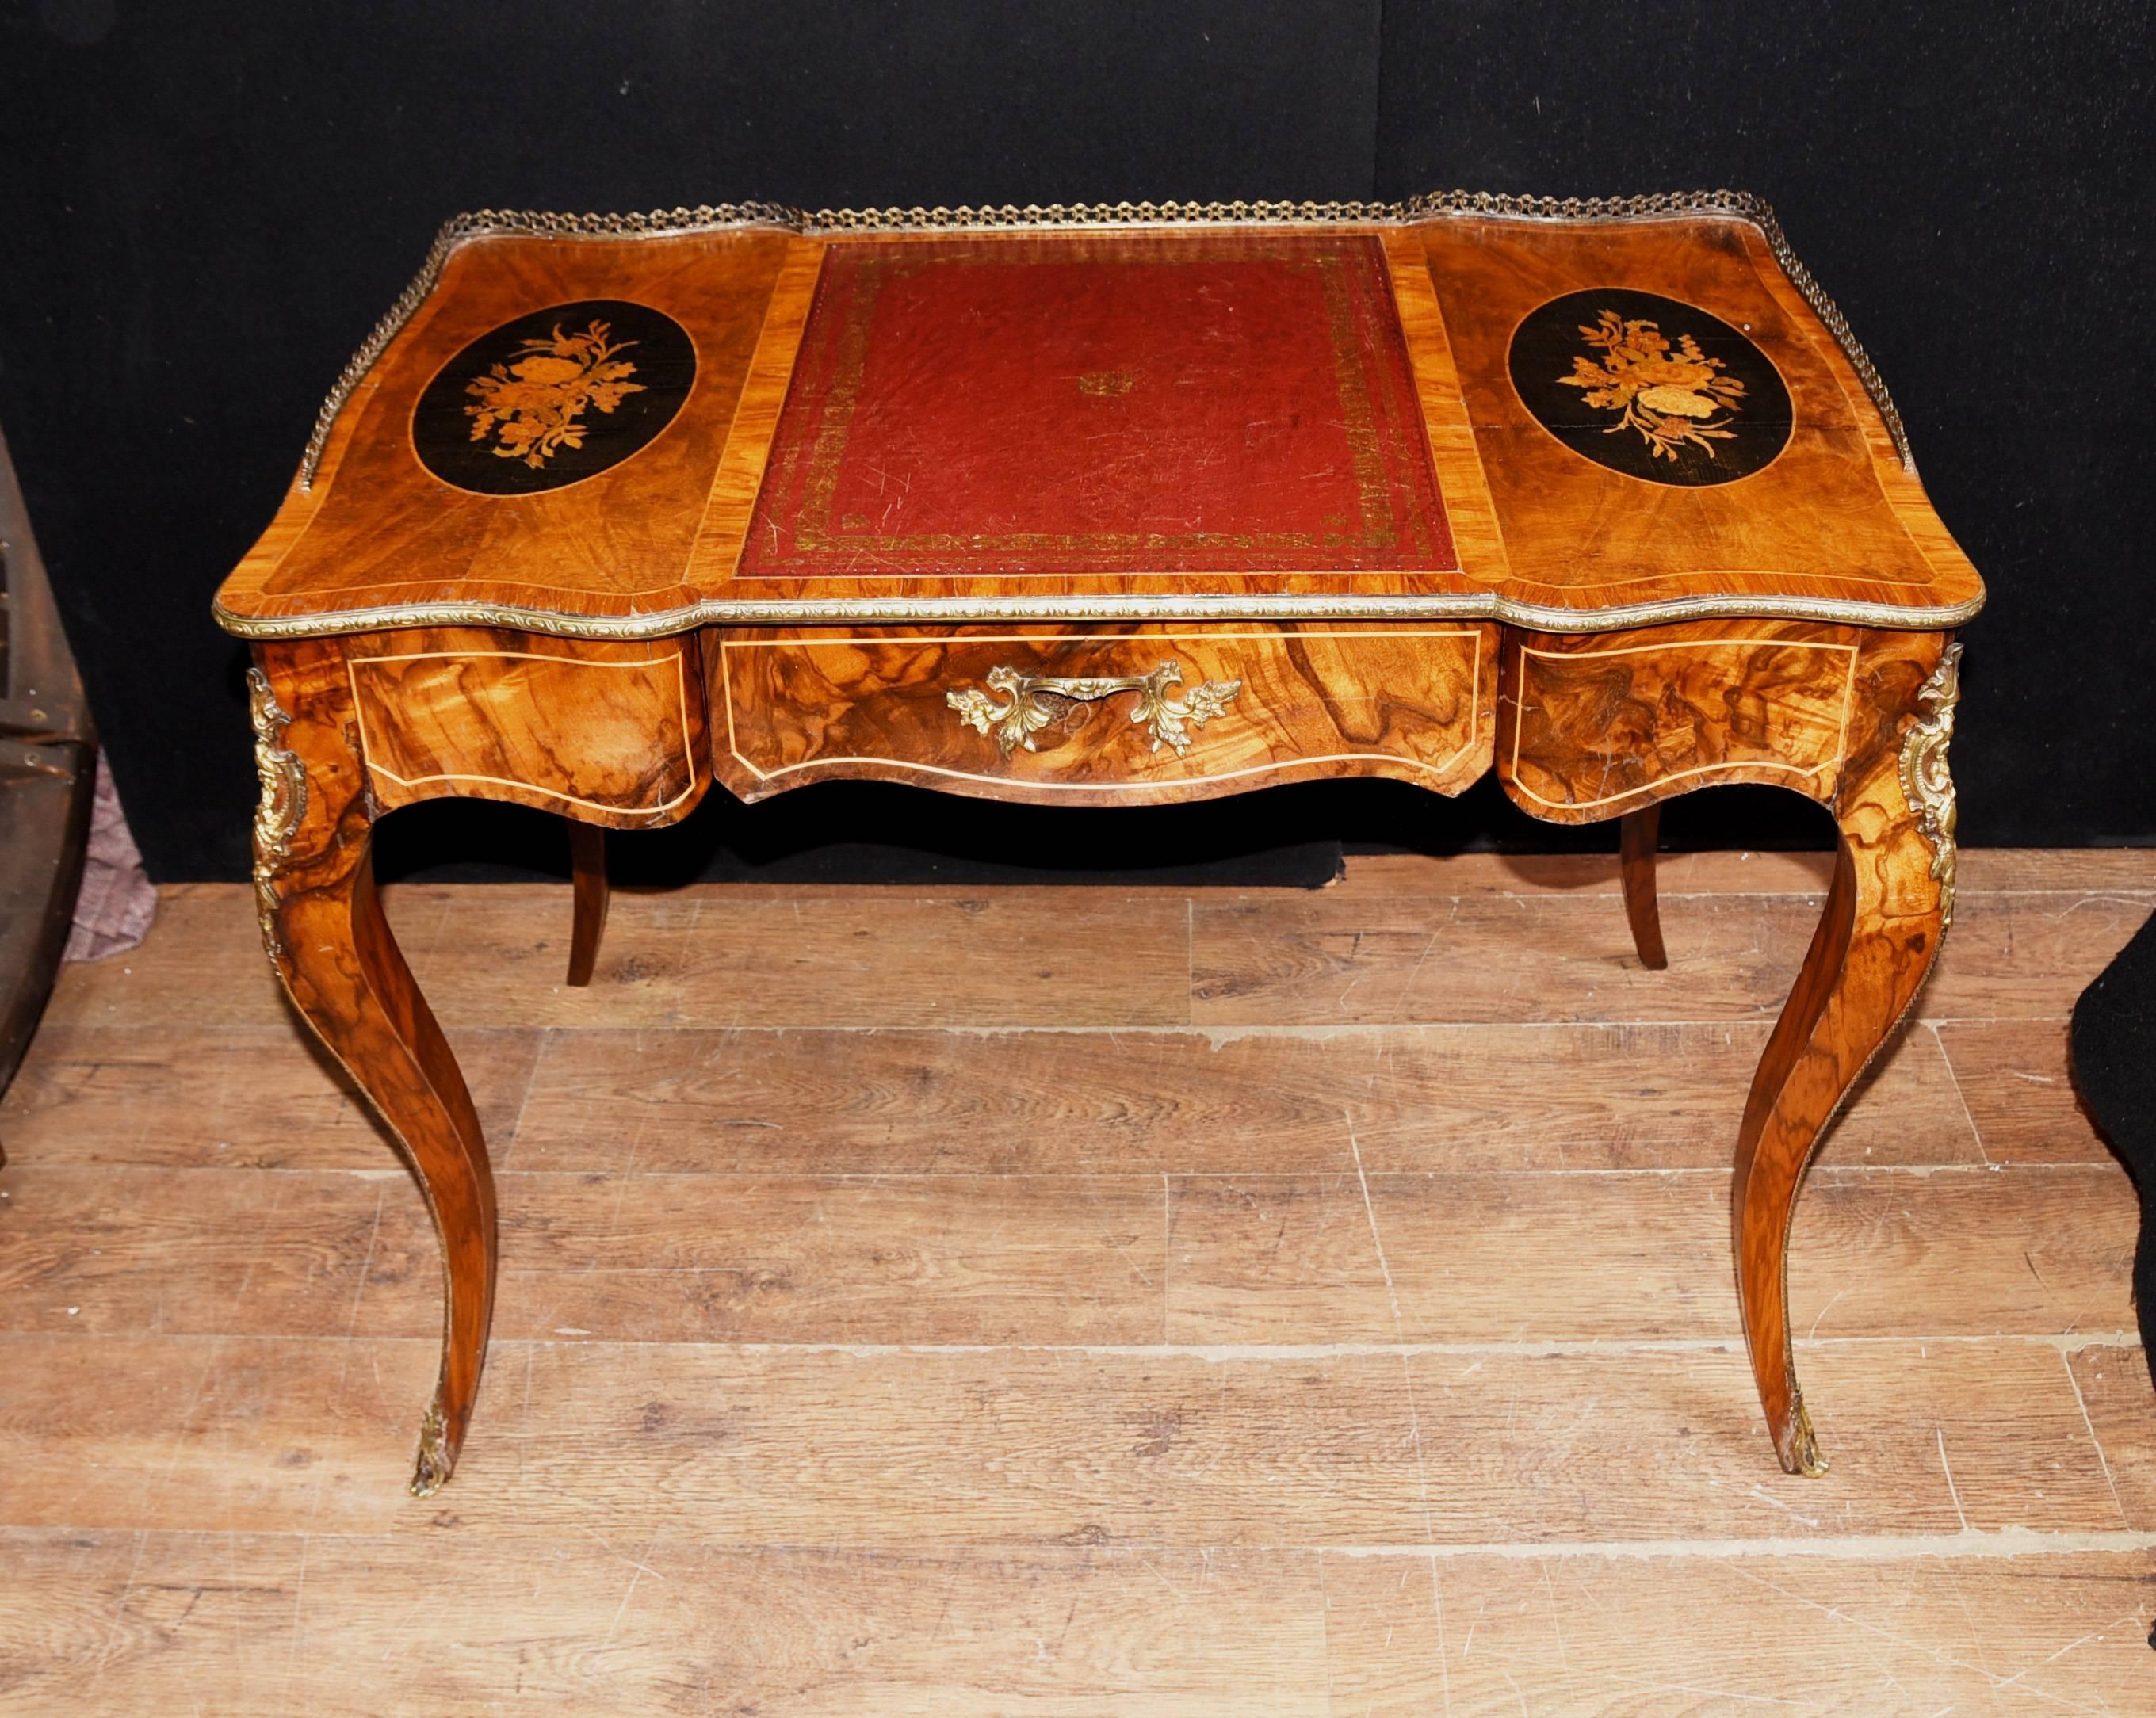 Highly charming French Empire writing table or bureau plat
handcrafted from walnut with ebonized plaques and floral inlay to the top
Ormolu fixtures include sabots, trim and intricate gallery
Great for a home office set up, single red tooled